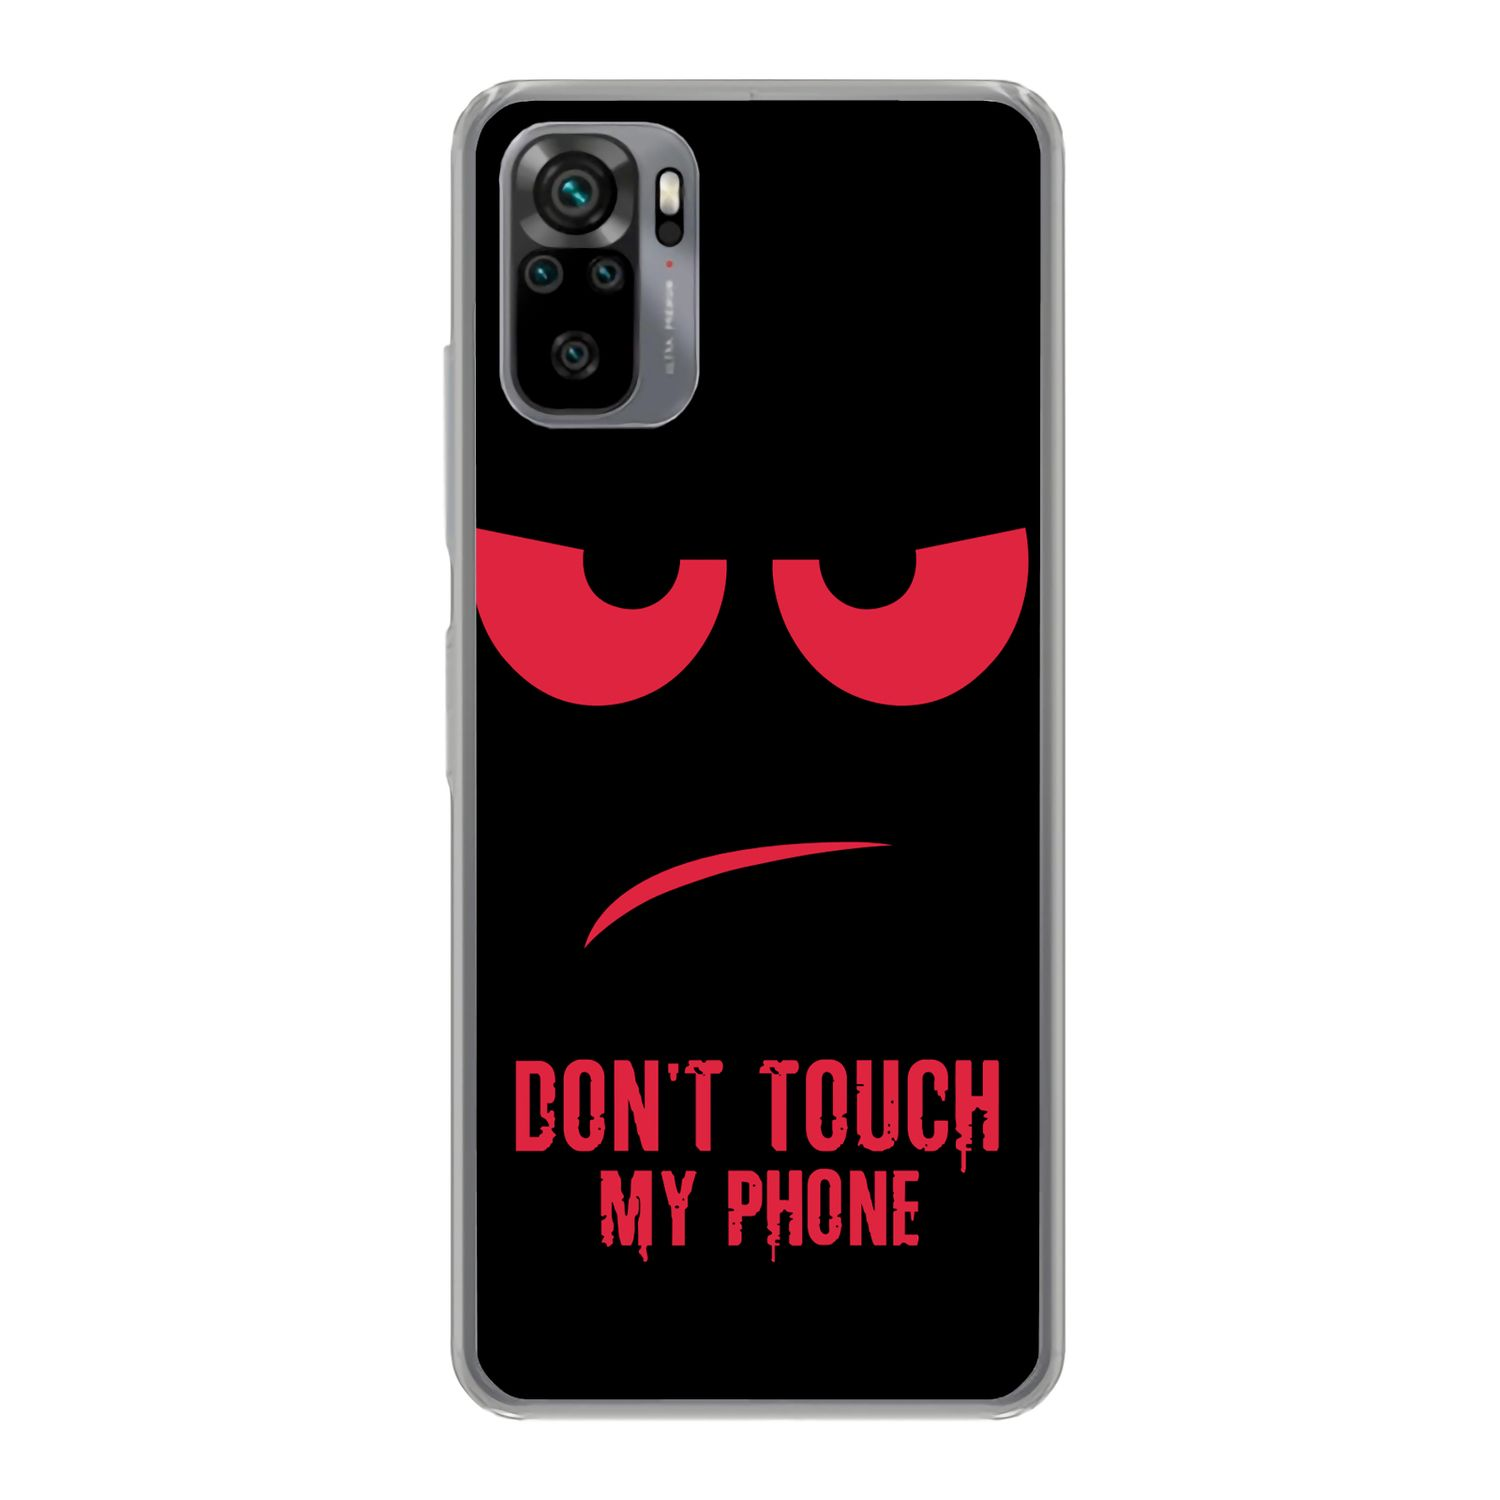 Redmi Case, Touch KÖNIG Dont My DESIGN 10S, Backcover, Phone Xiaomi, Rot Note